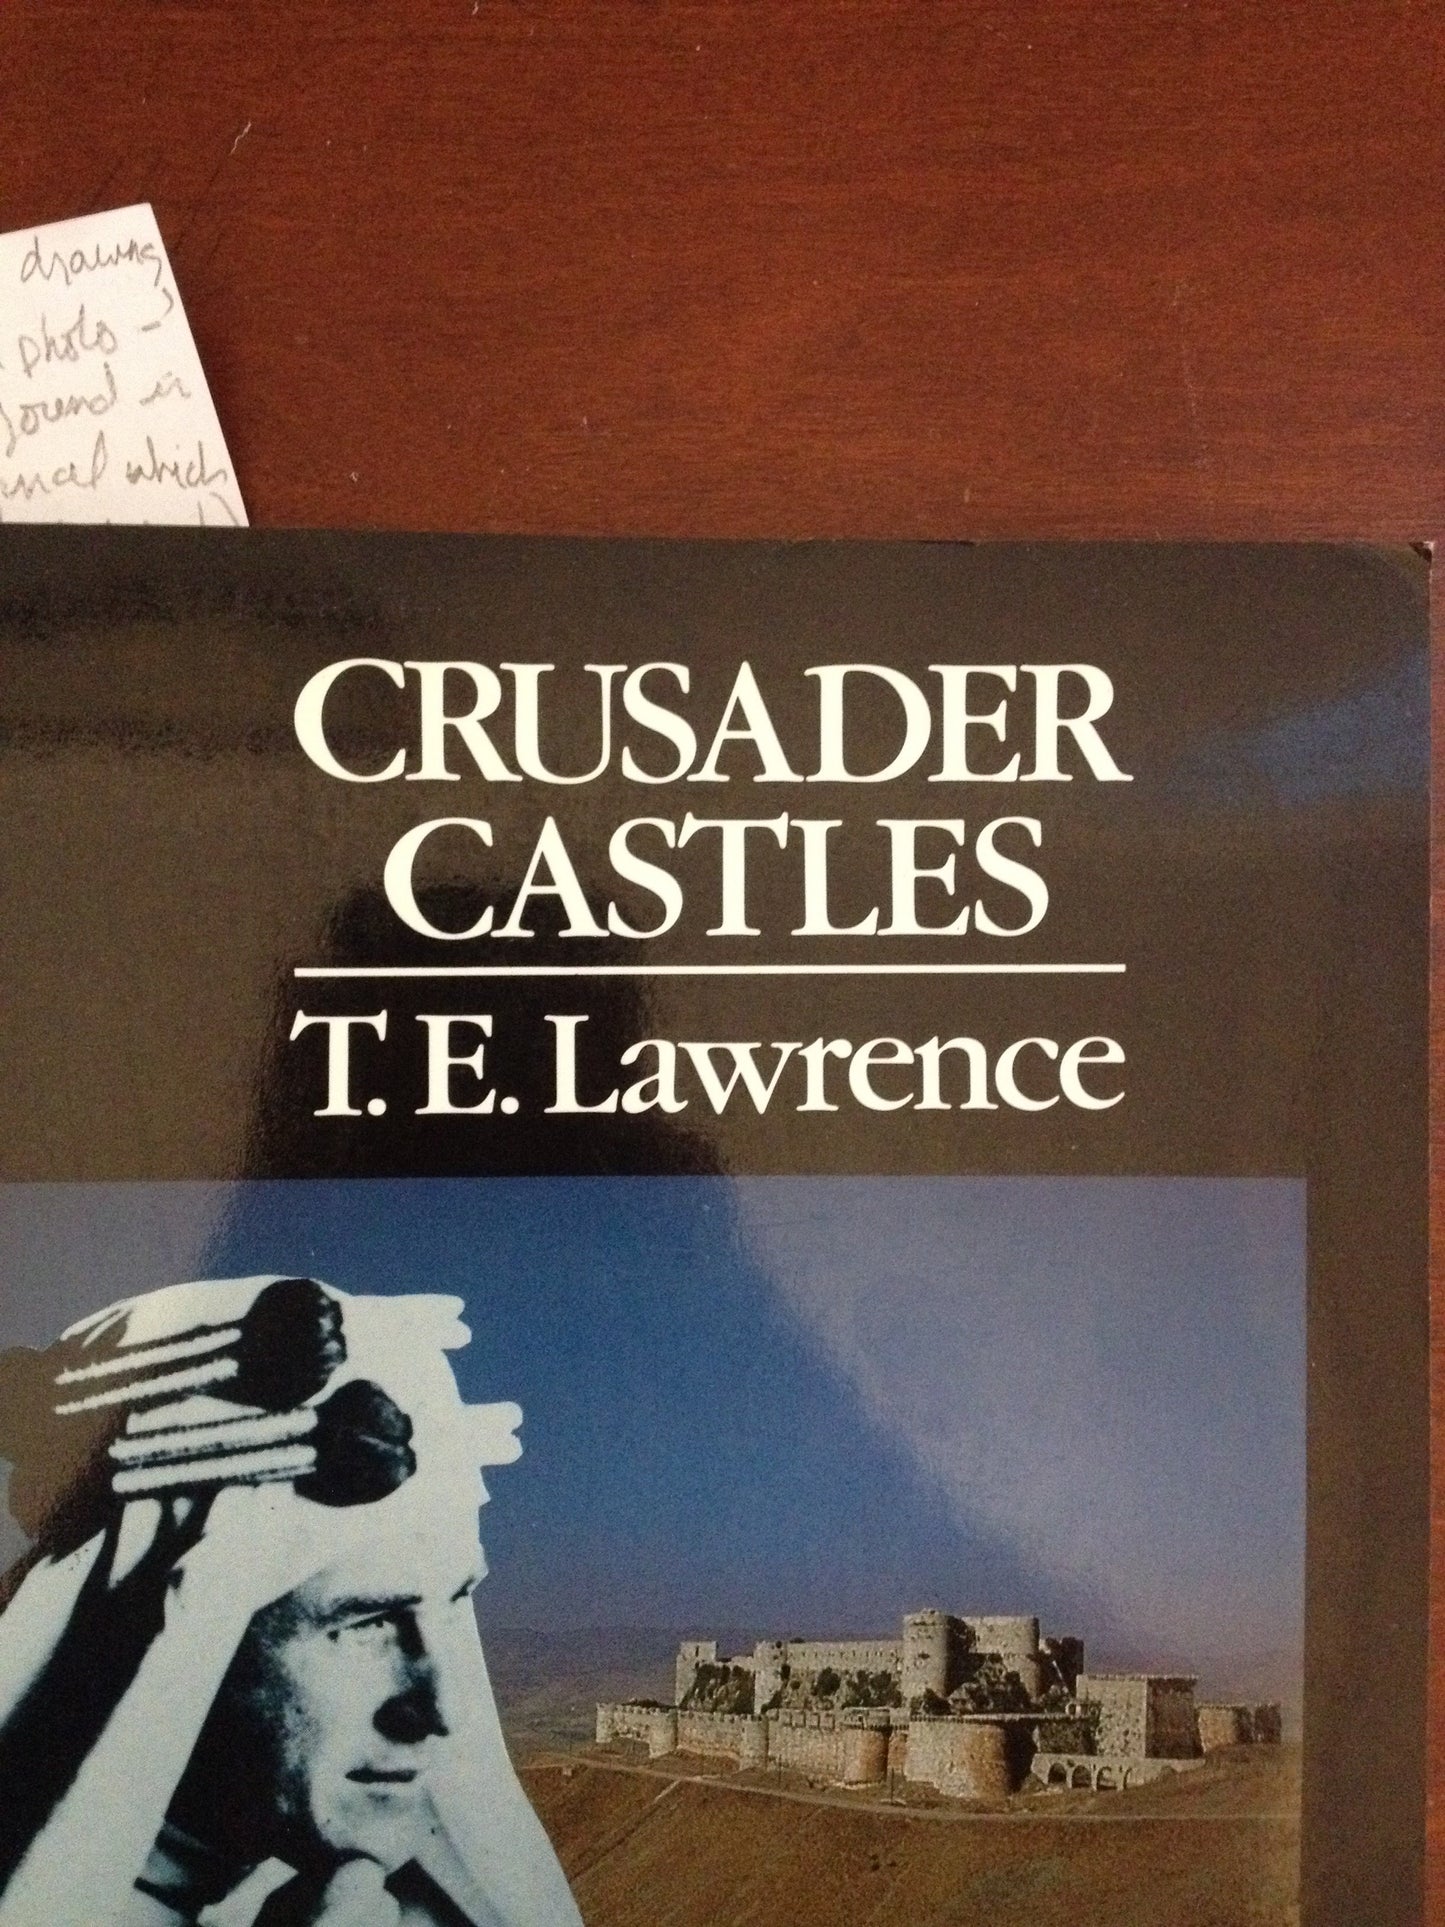 CRUSADER CASTLES   BY: TE LAWRENCE BooksCardsNBikes